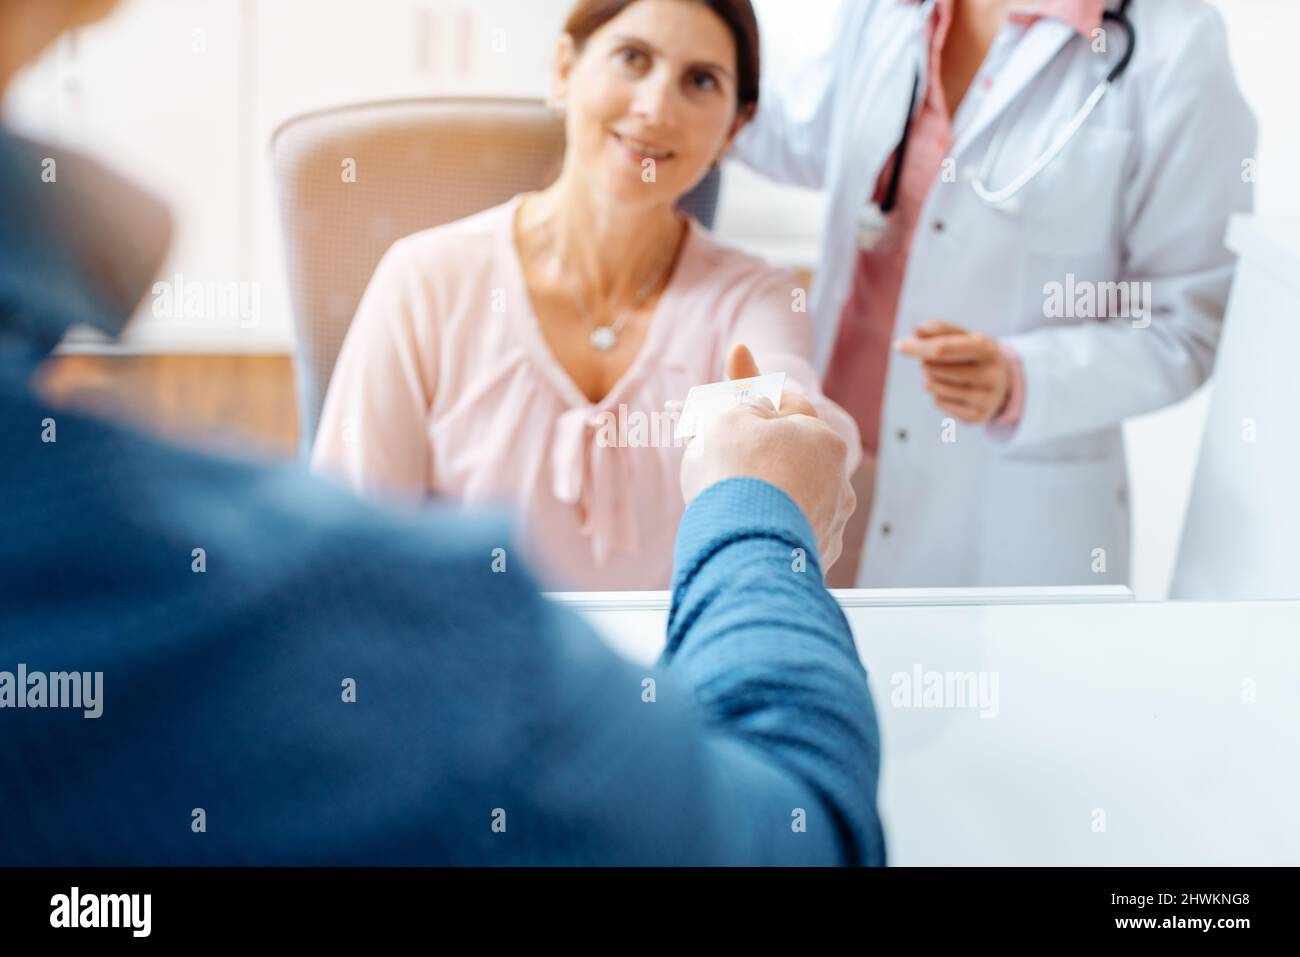 Patient giving electronic health card at front desk of doctor's office Stock Photo